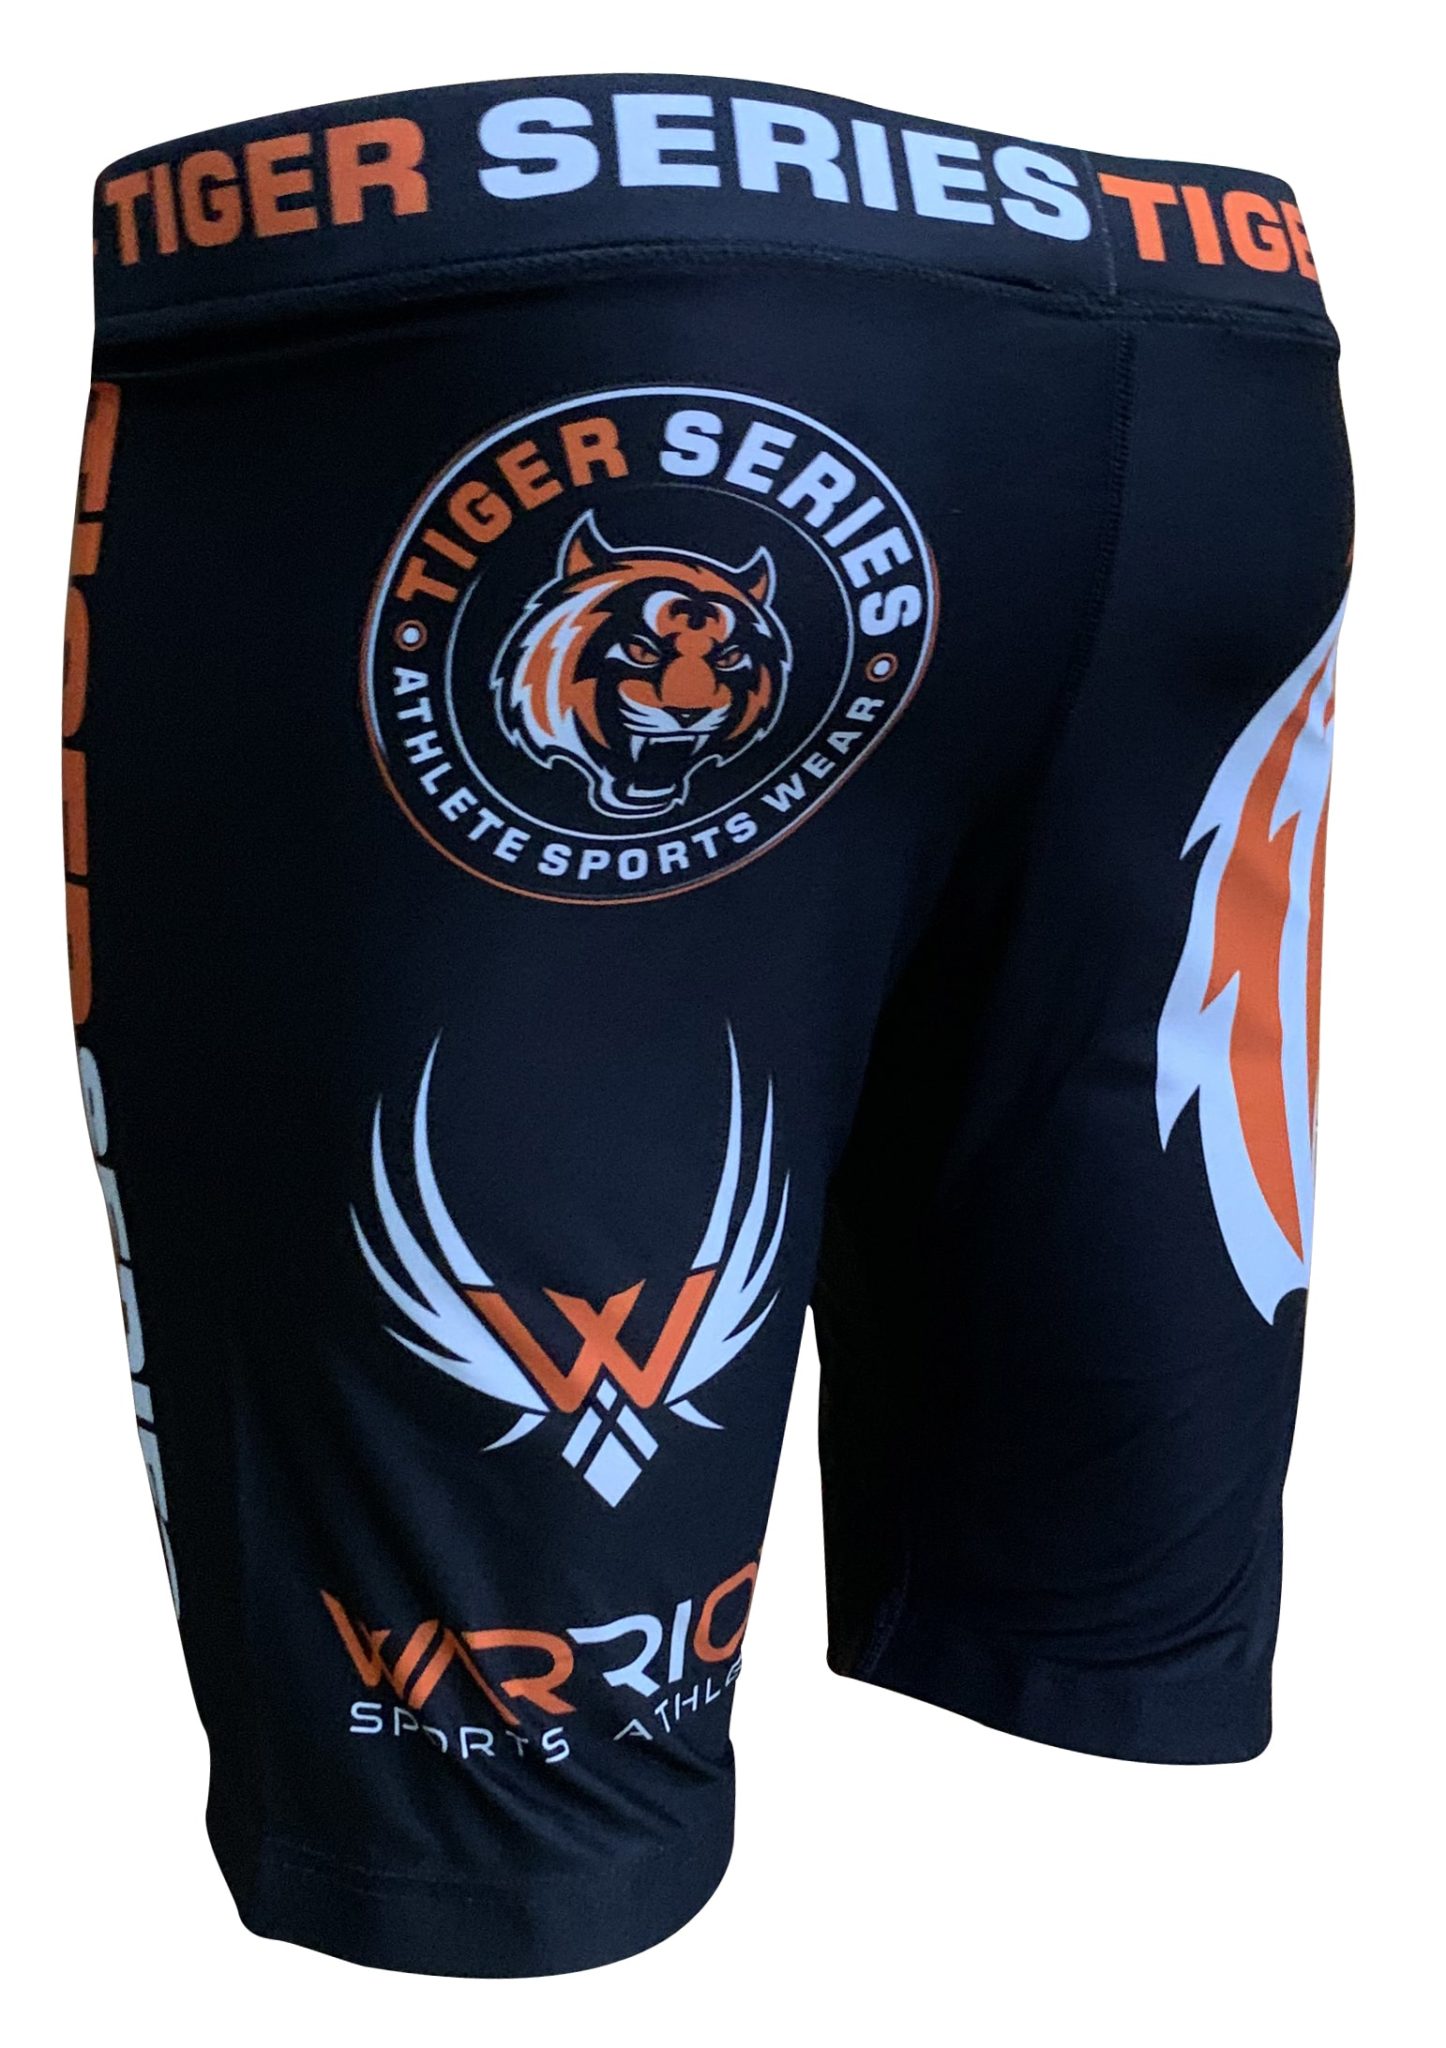 Tiger Series Vale Tudo Shorts For Boxing – Tiger Pro Fight Shop